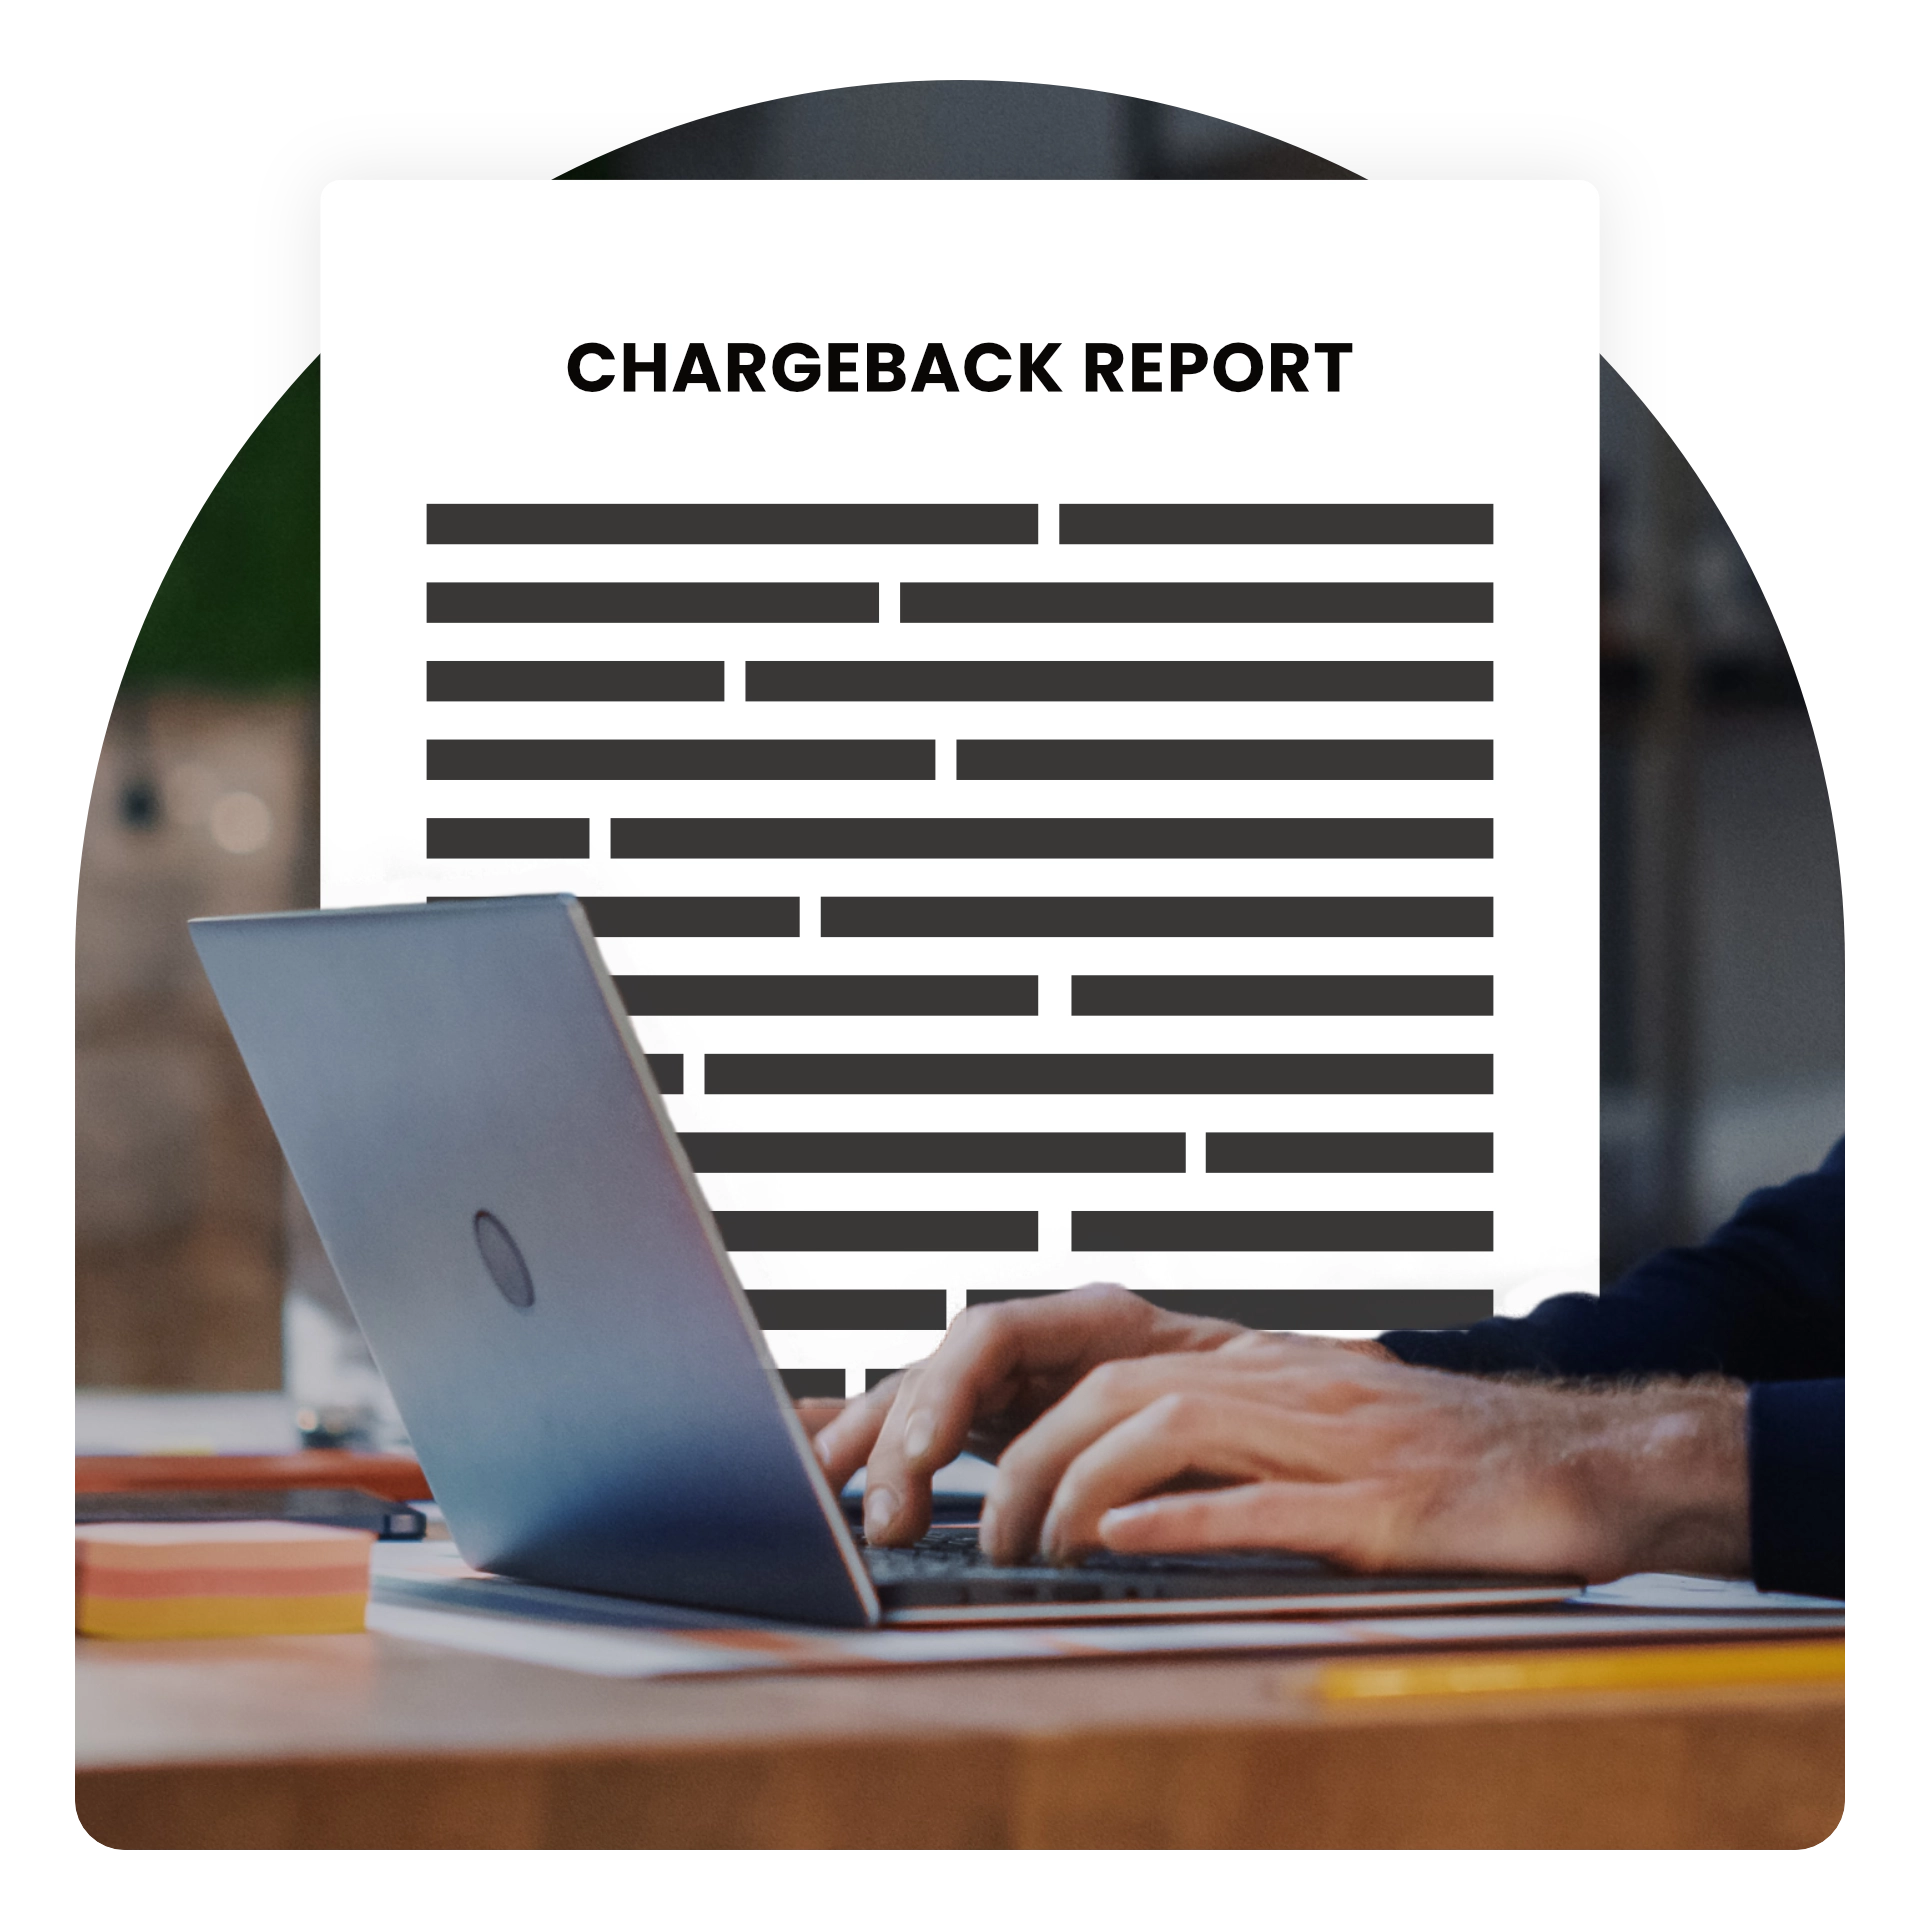 Chargeback report is available to download any time you need a proof of stay